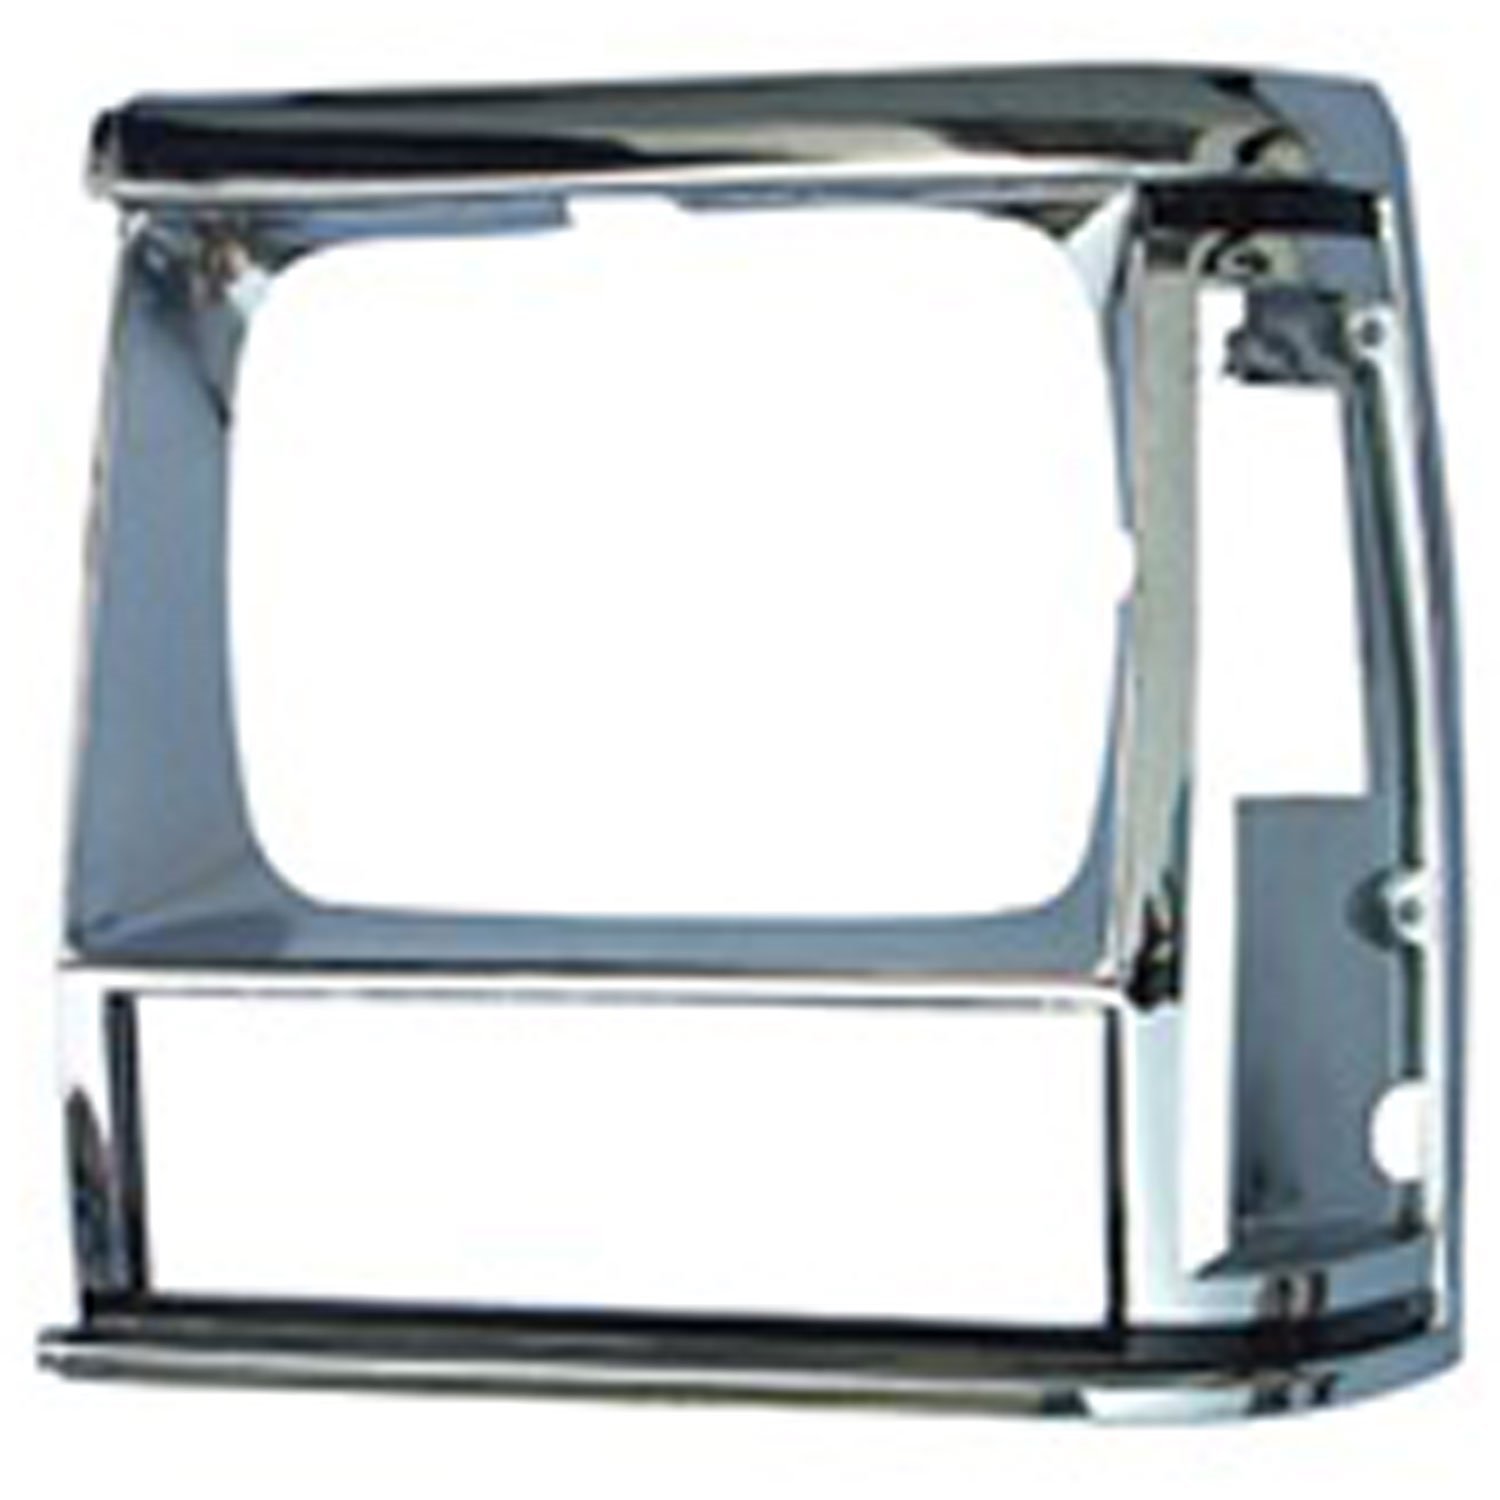 This chrome headlight bezel from Omix-ADA fits the left side of 84-90 Jeep Cherokee XJ and 86-90 Comanche MJ